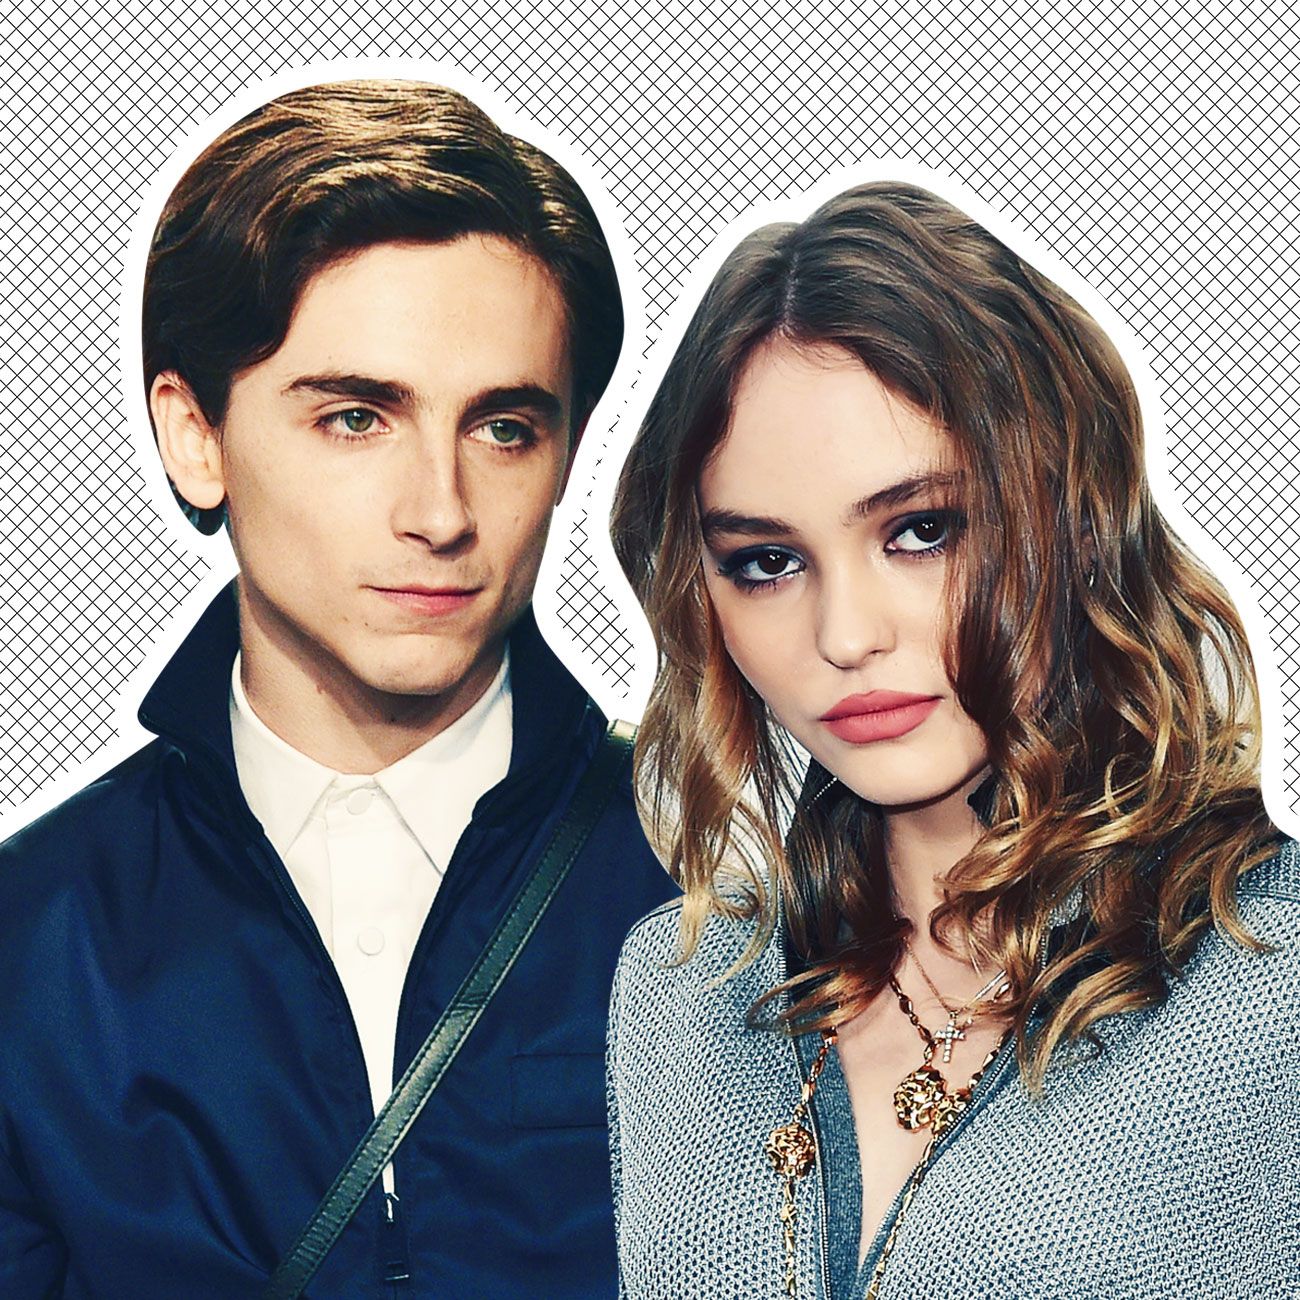 Timothee Chalamet And Lily-Rose Depp Are Over